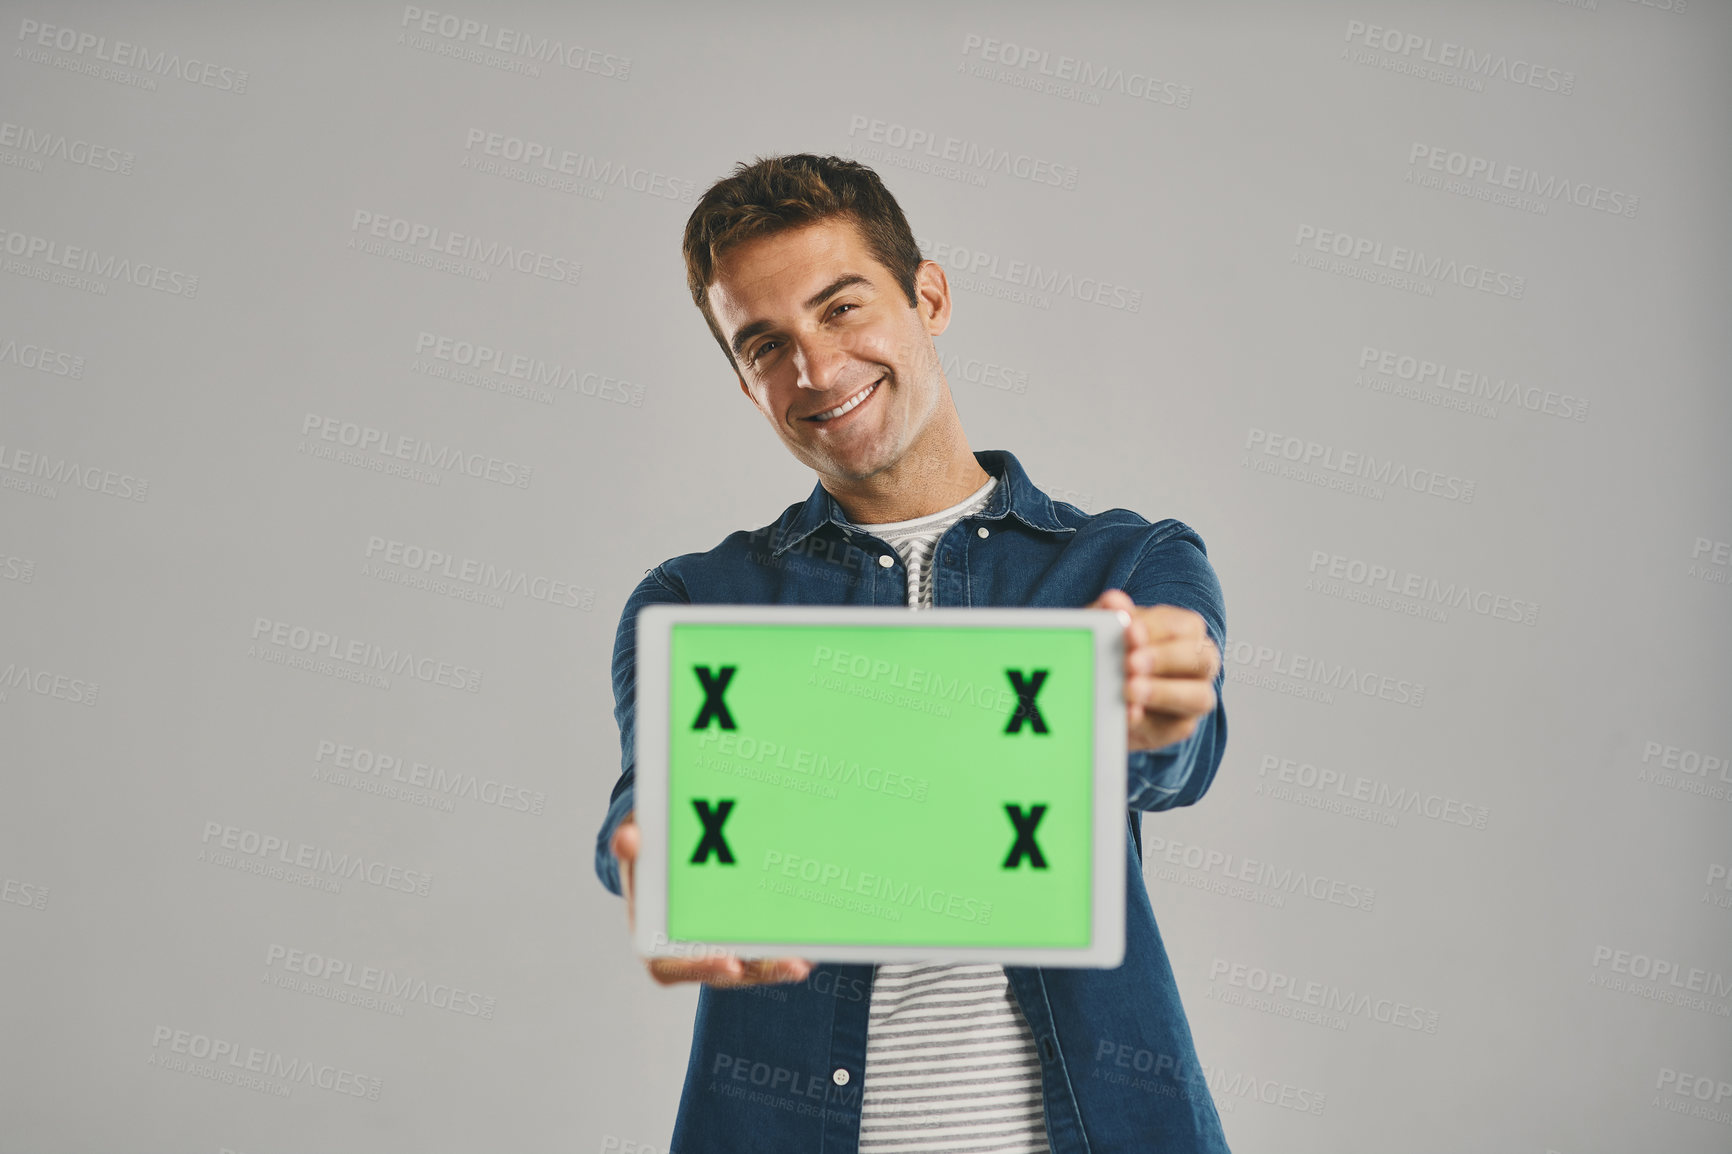 Buy stock photo Studio portrait of a young man holding a digital tablet with a green screen against a grey background